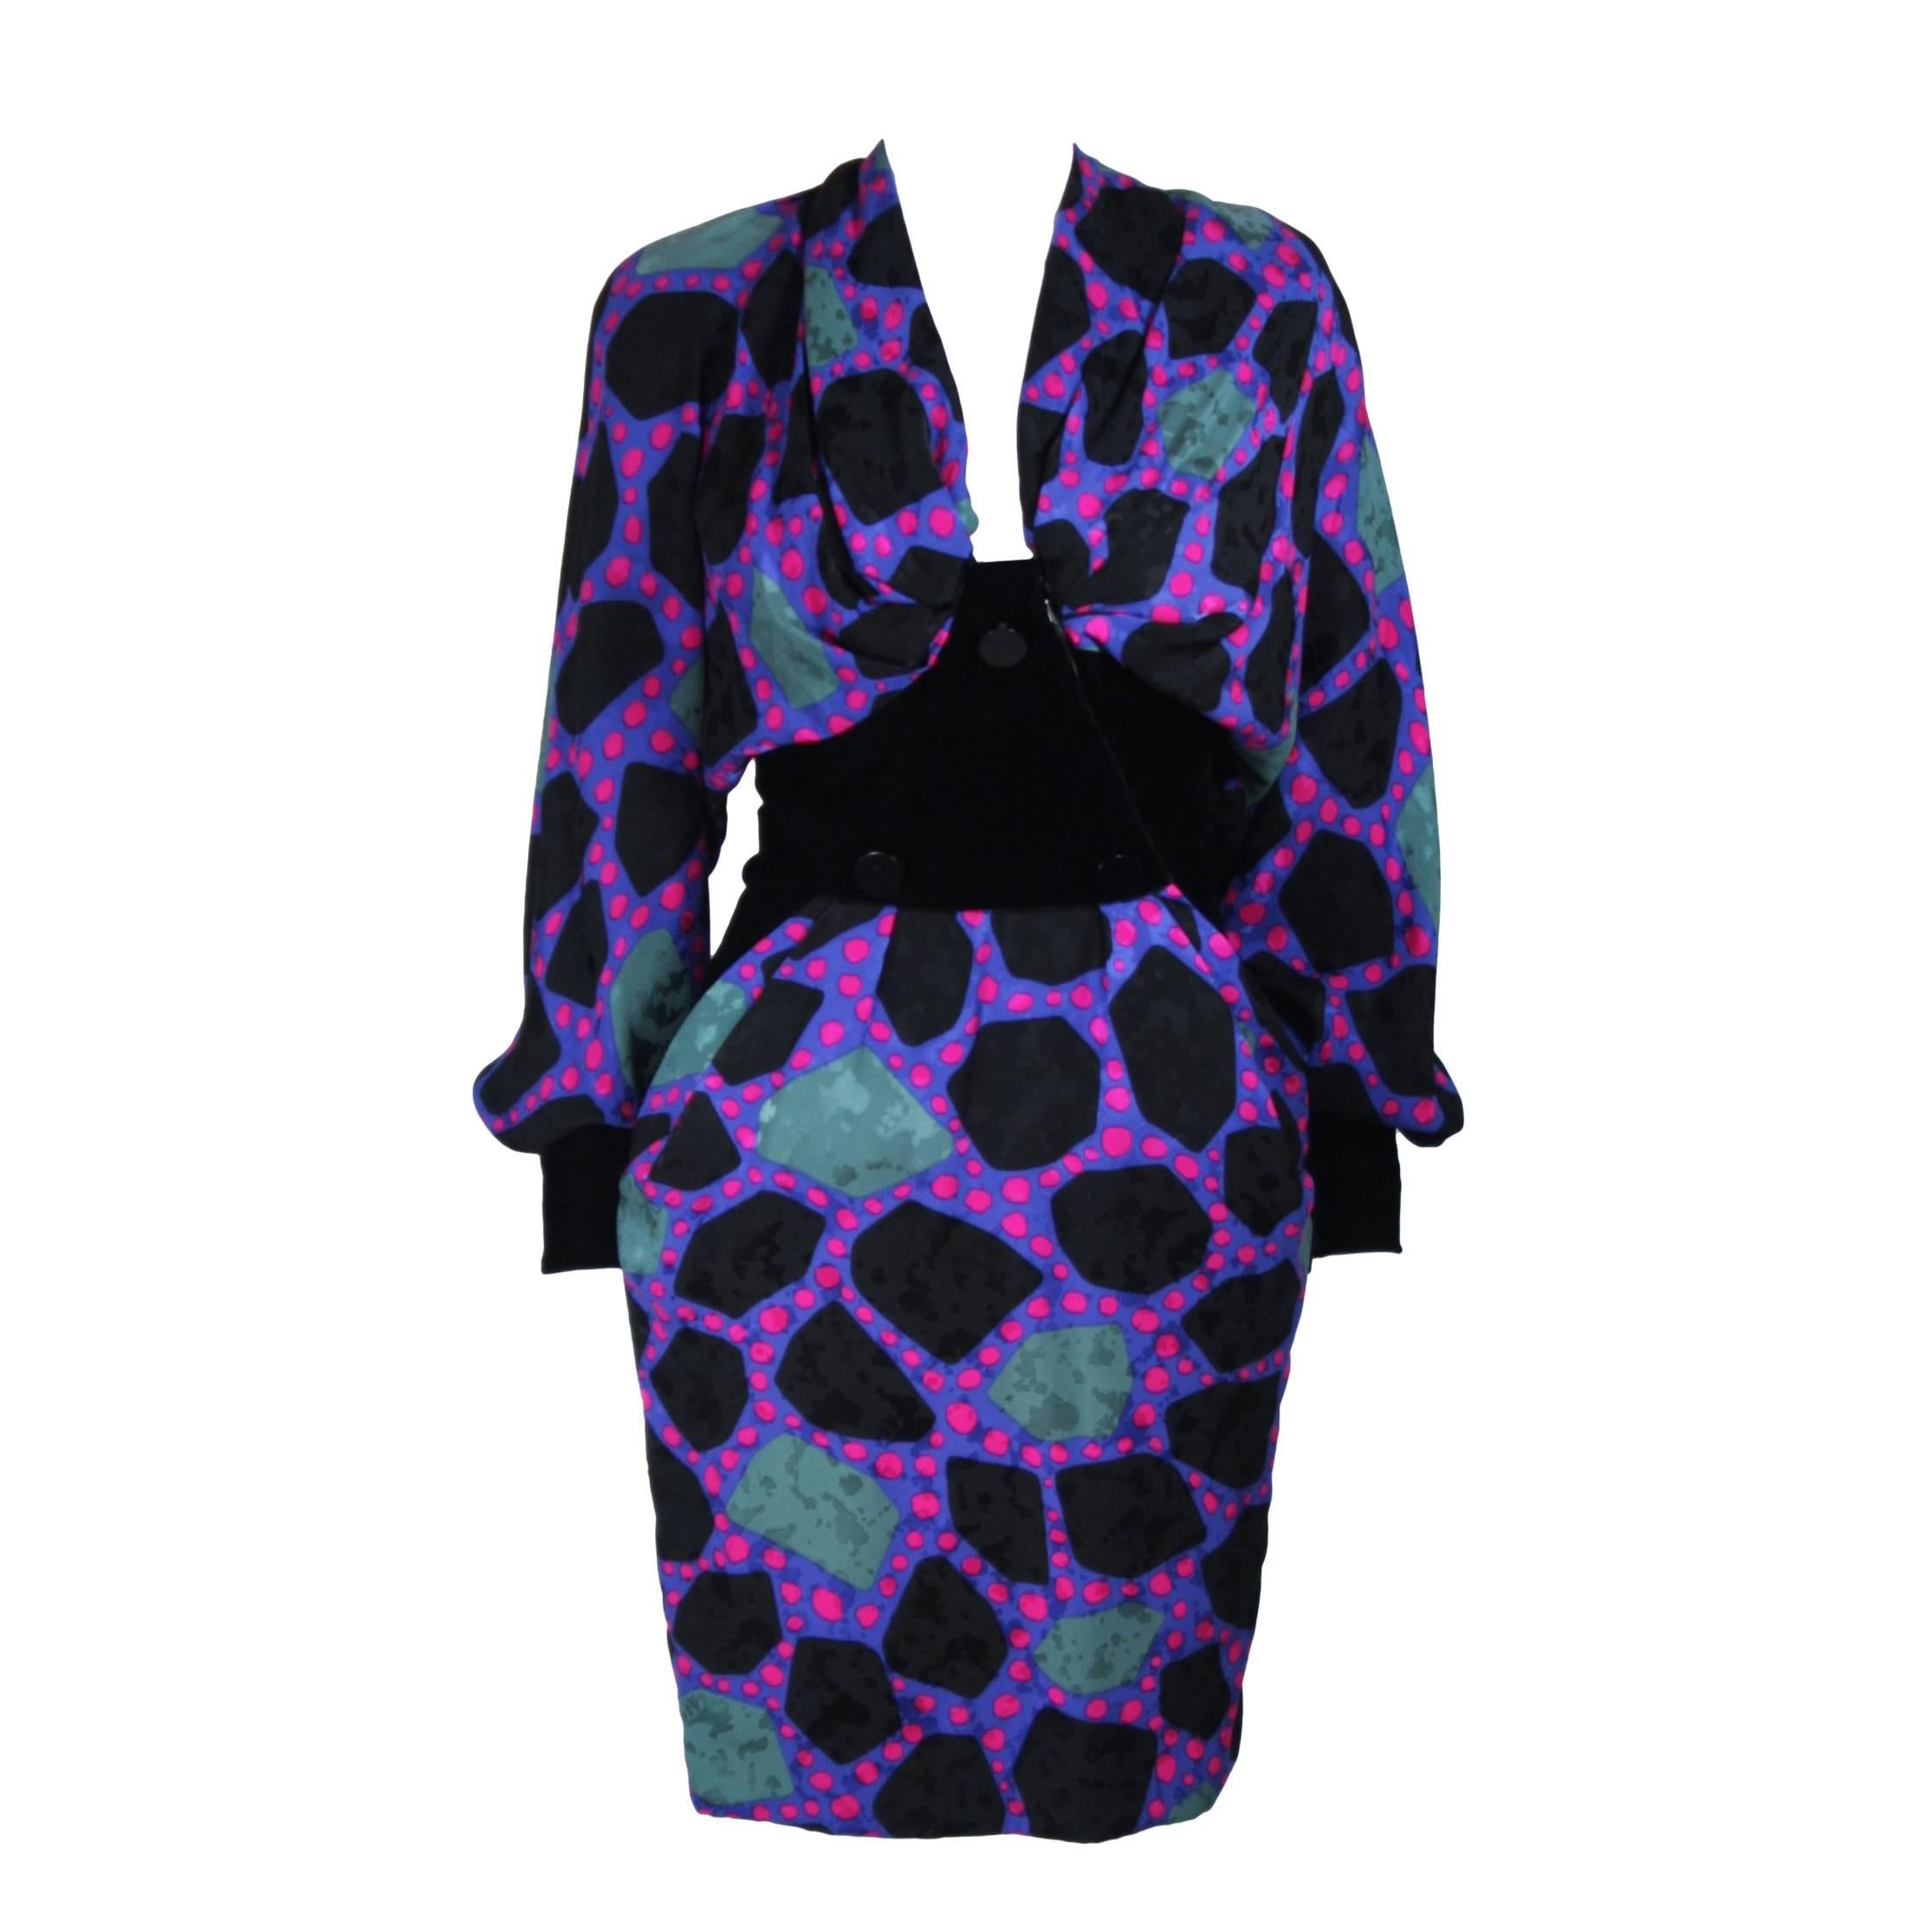 JACQUELINE DE RIBES Circa 1990s Abstract Silk Printed Dress with Velvet Size 6-8 For Sale